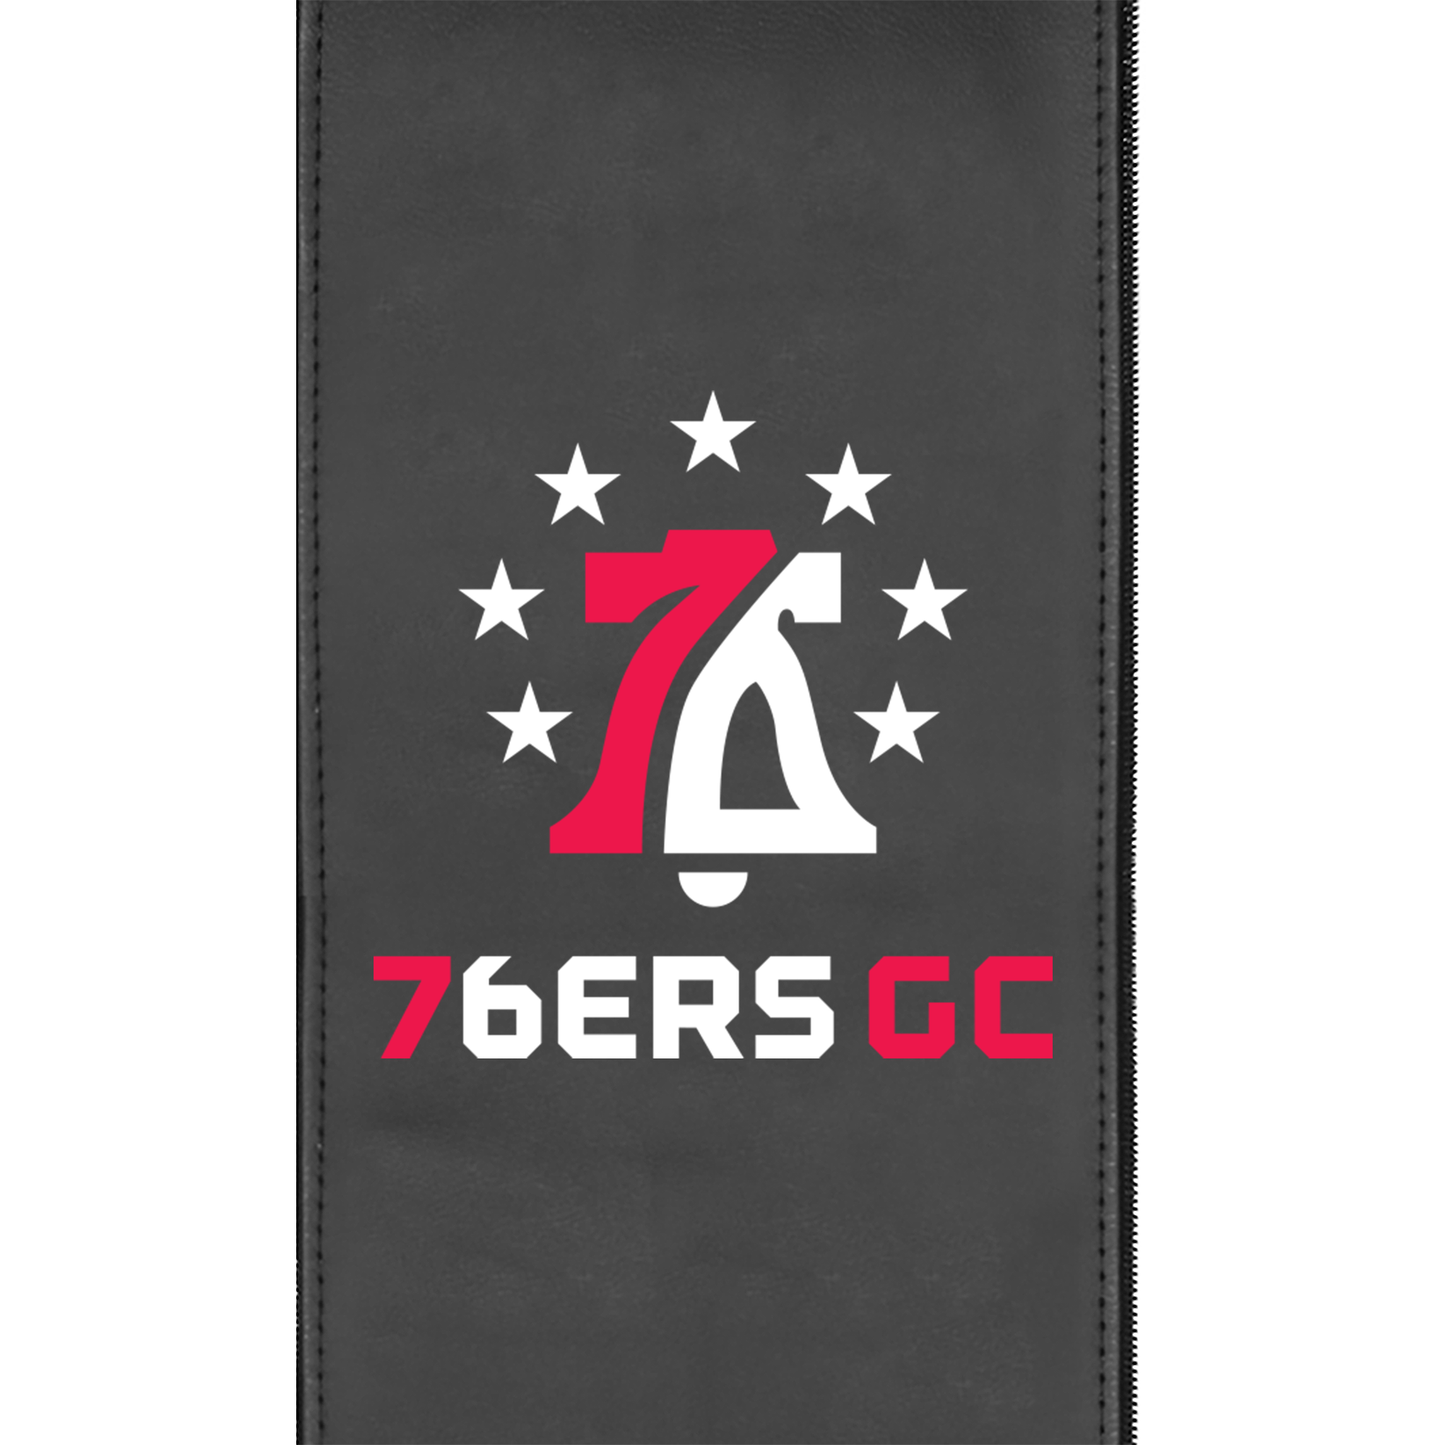 Philadelphia 76ers GC Logo Panel [CAN ONLY BE SHIPPED TO PENNSYLVANIA]